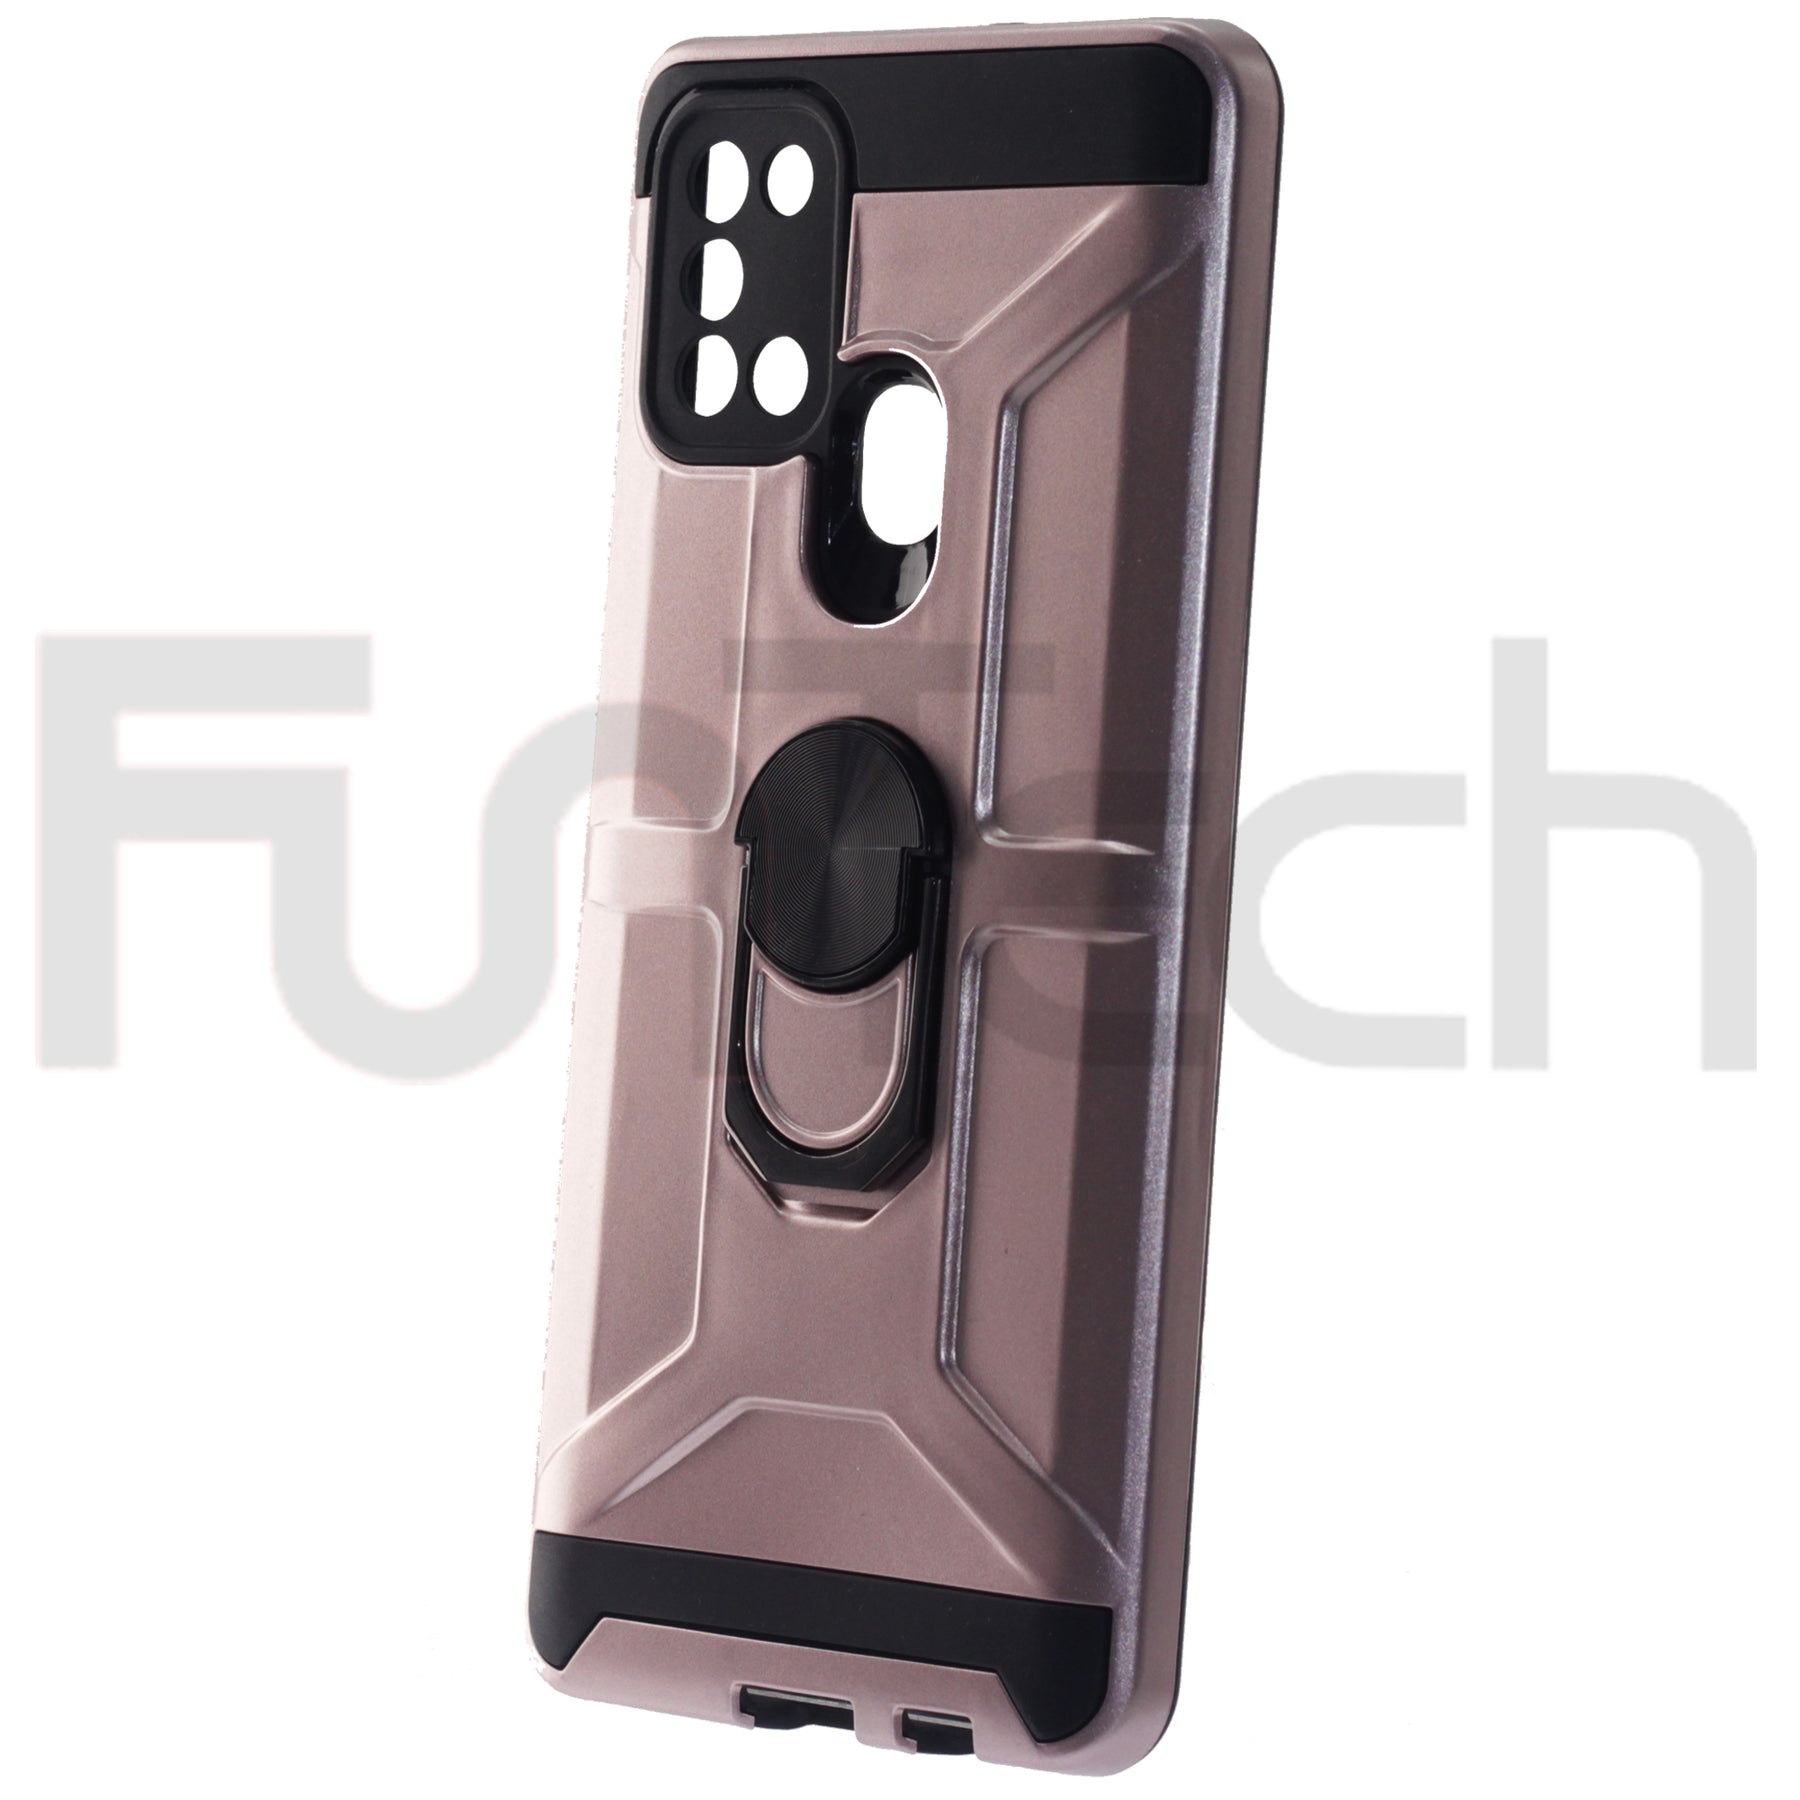 Samsung A21s, Armor Ring Case, Color Rose Gold.